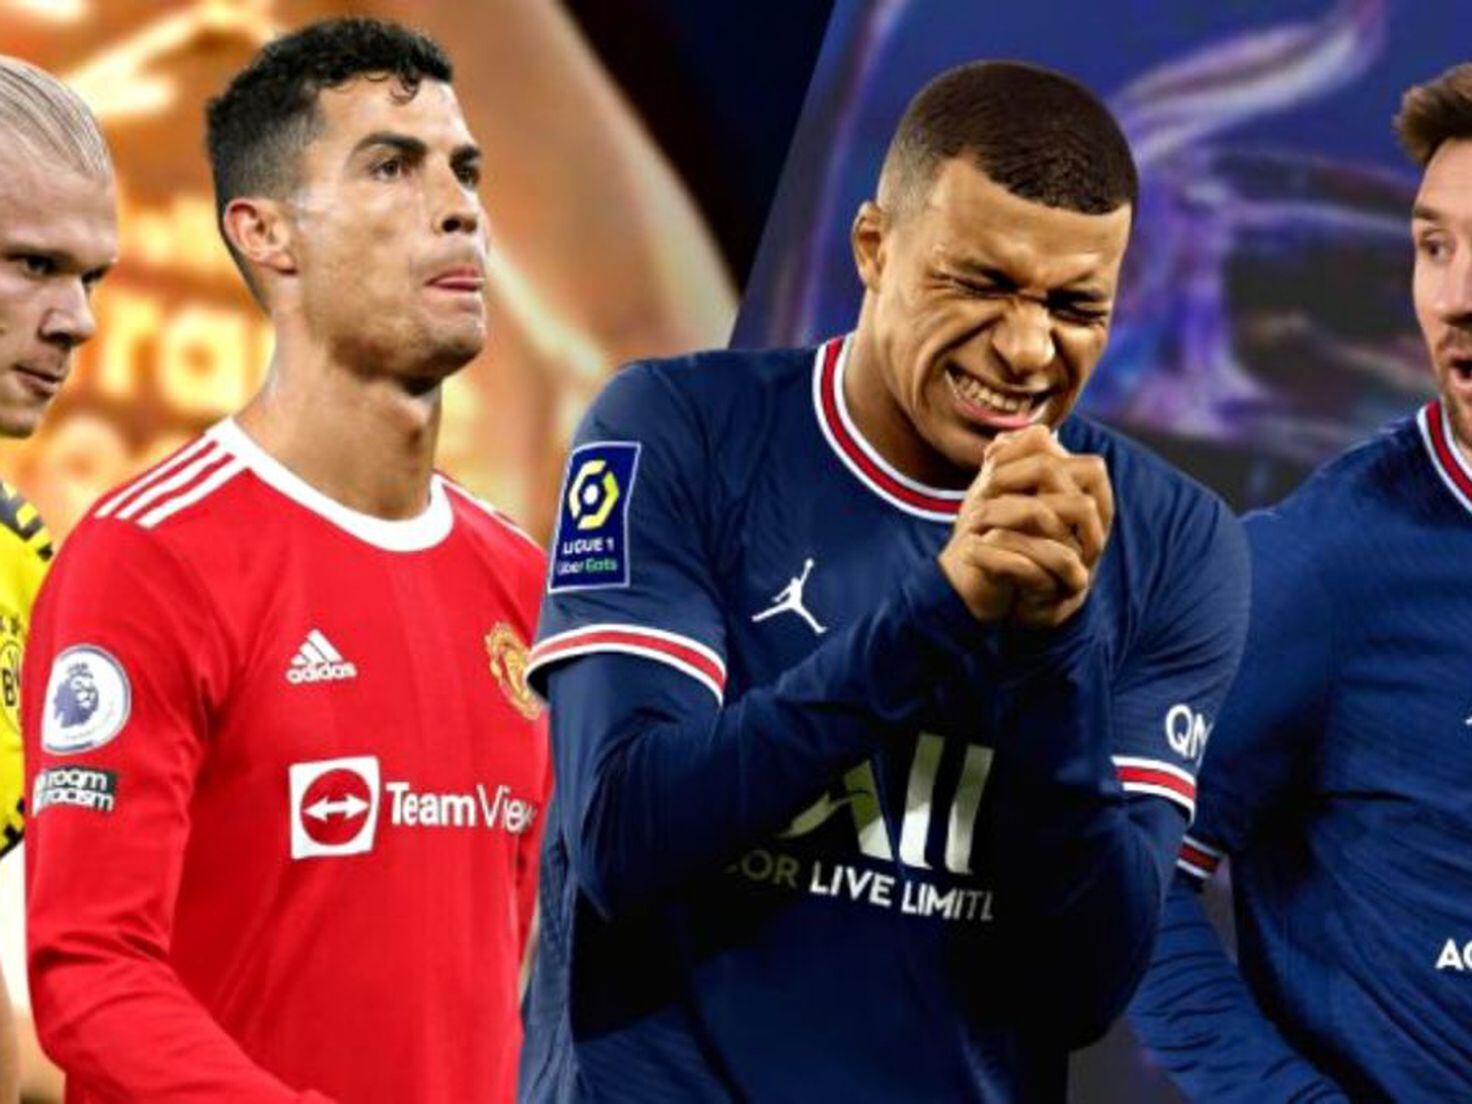 Champions League top scorers in group stage: Mbappe & Salah tied